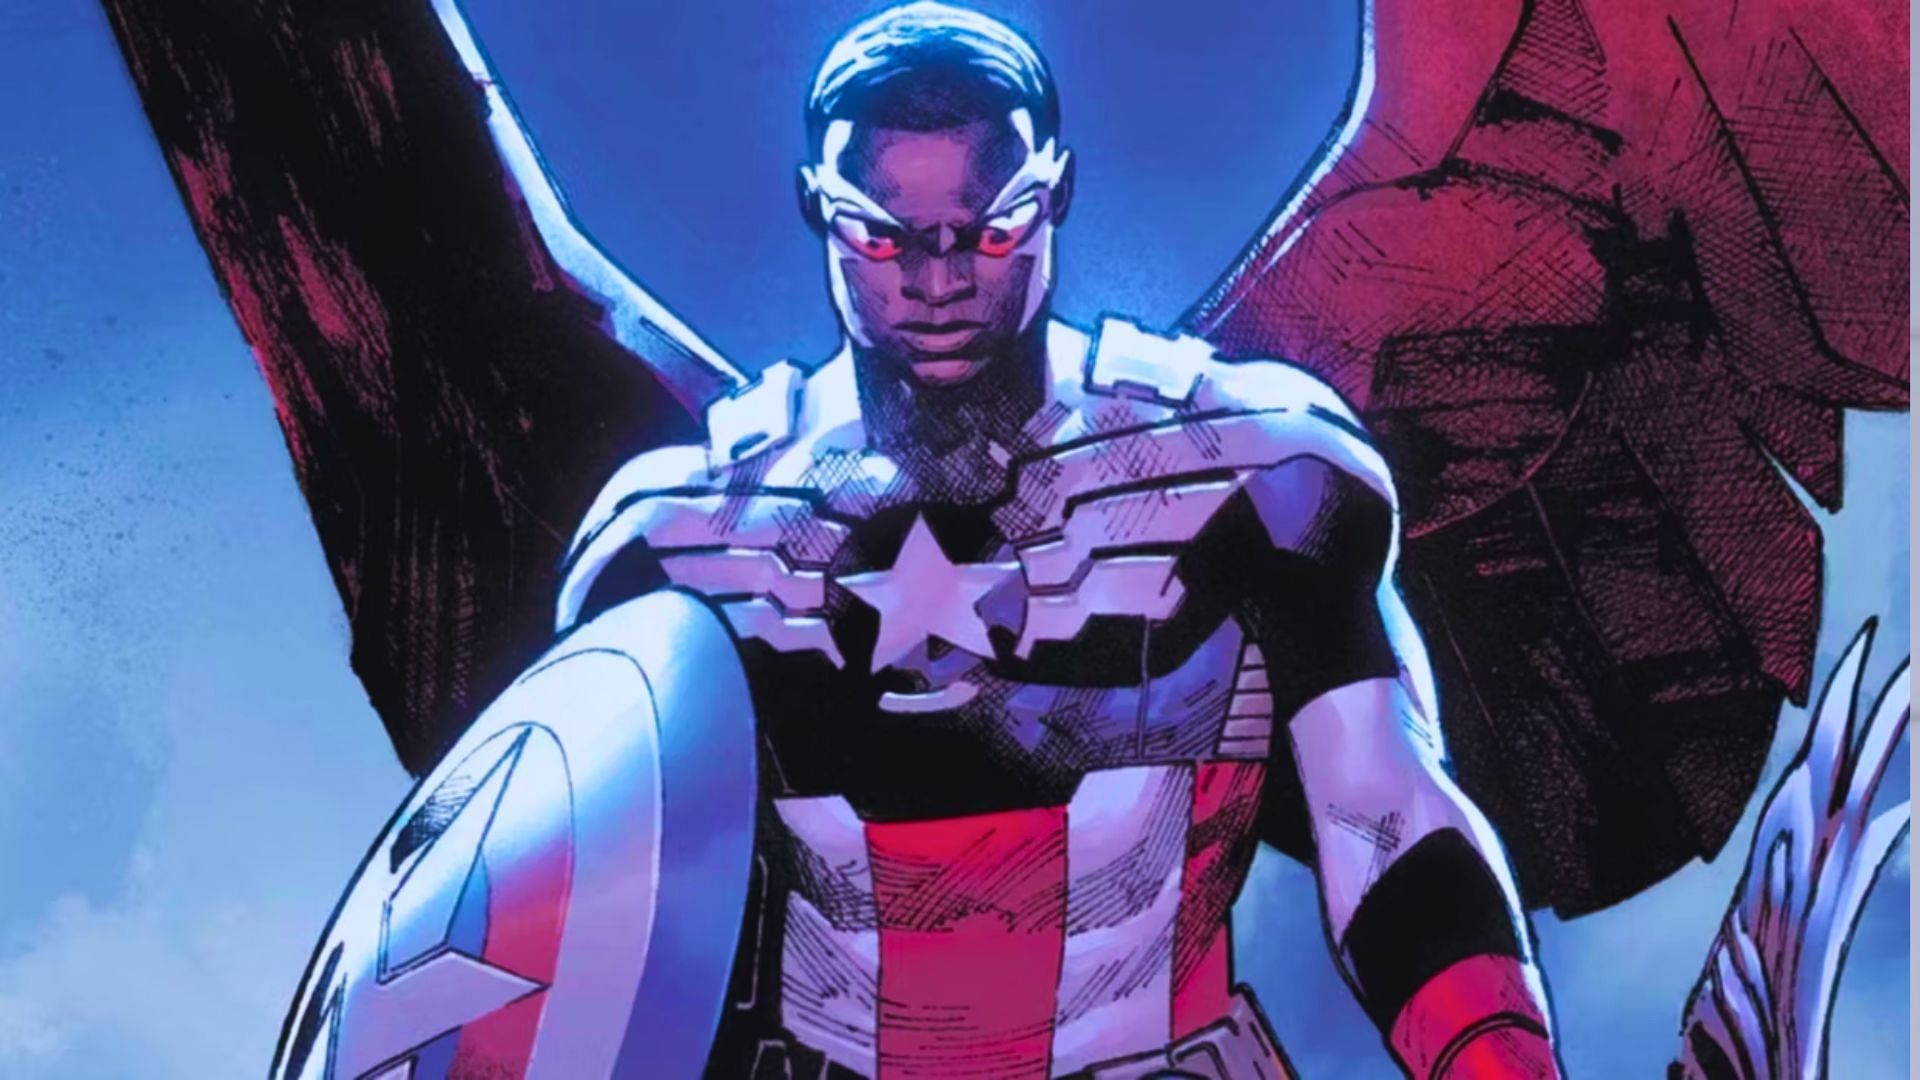 Captain America: Brave New World leaked images show Falcon in all his glory